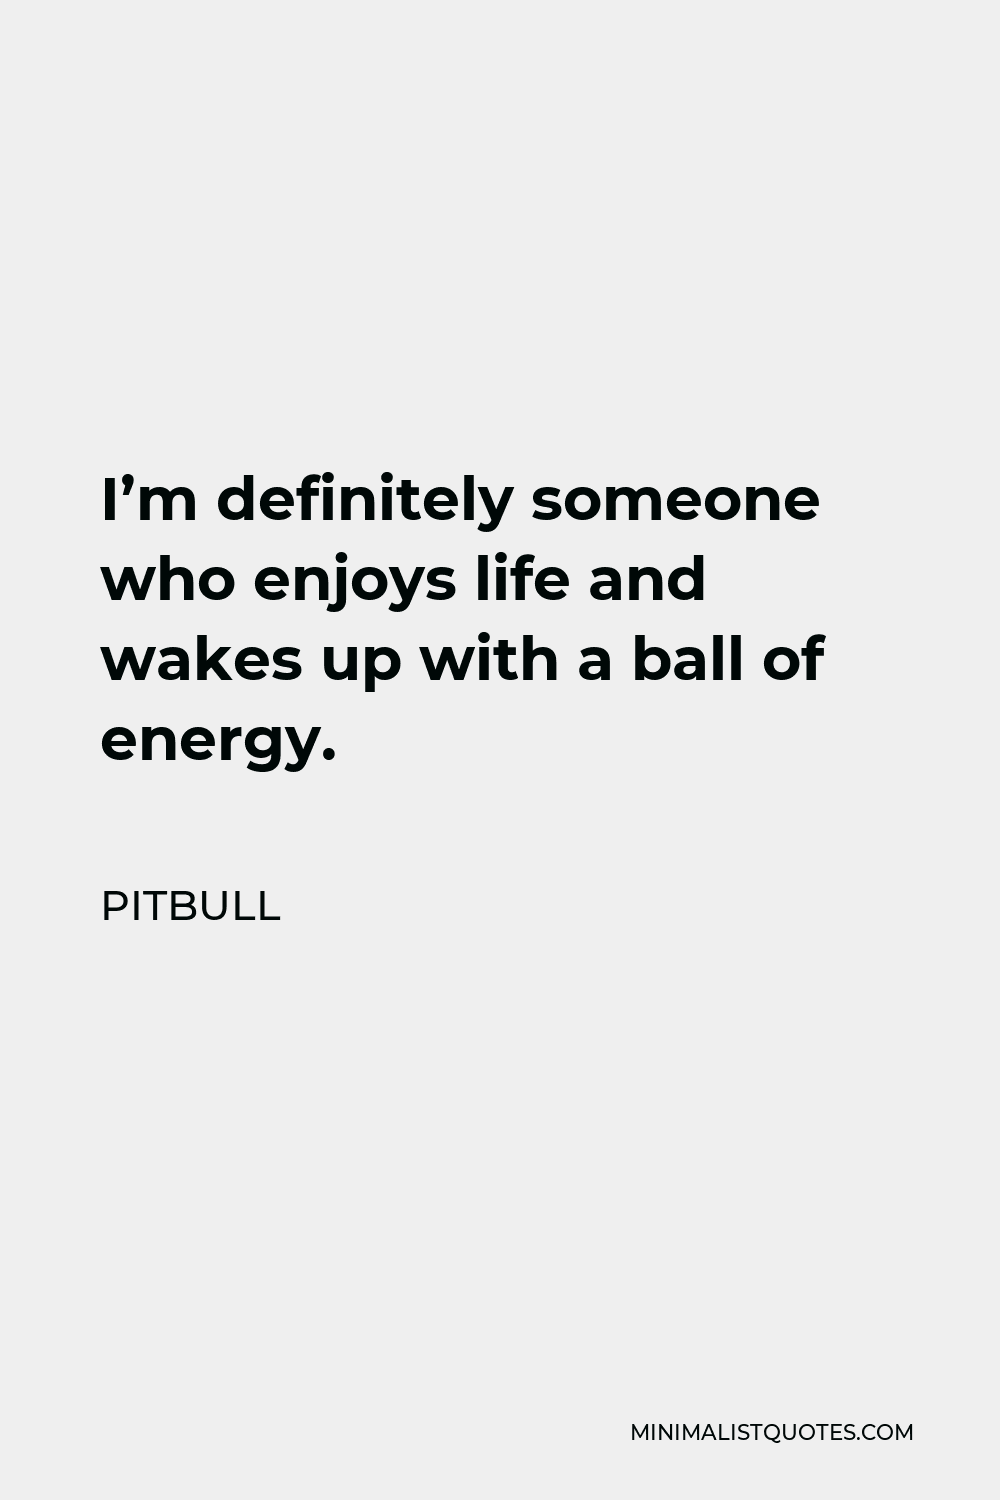 Pitbull Quote - I’m definitely someone who enjoys life and wakes up with a ball of energy.